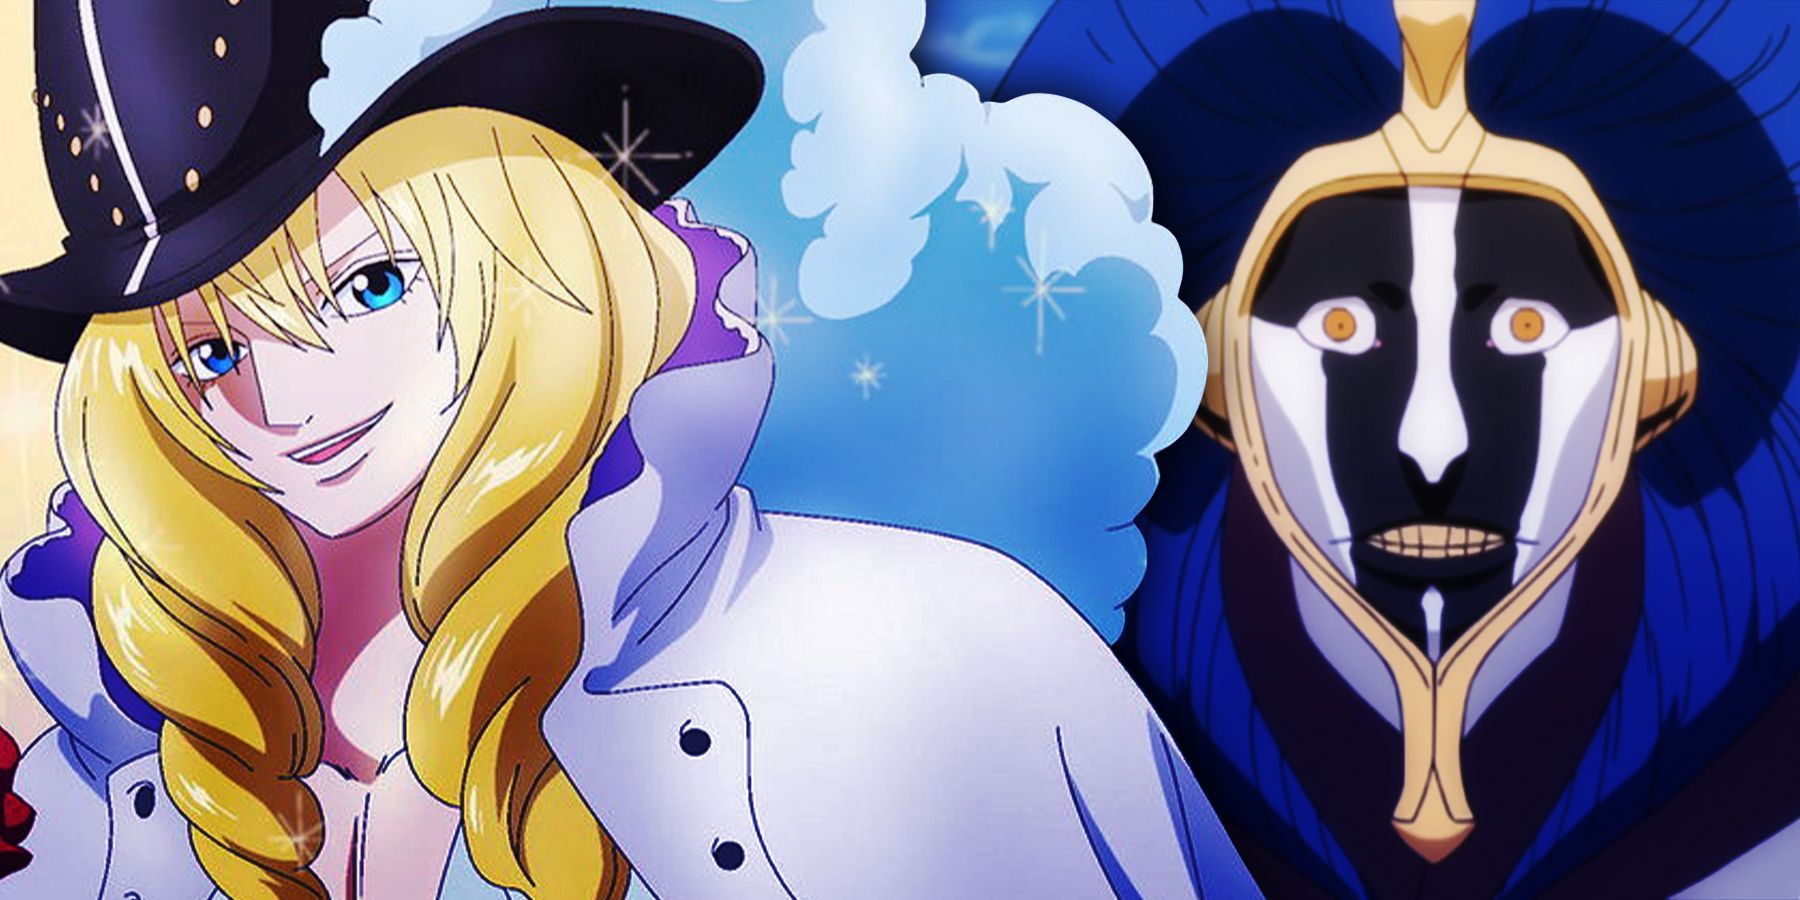 Mayuri from anime Bleach and Cavendish from anime One Piece